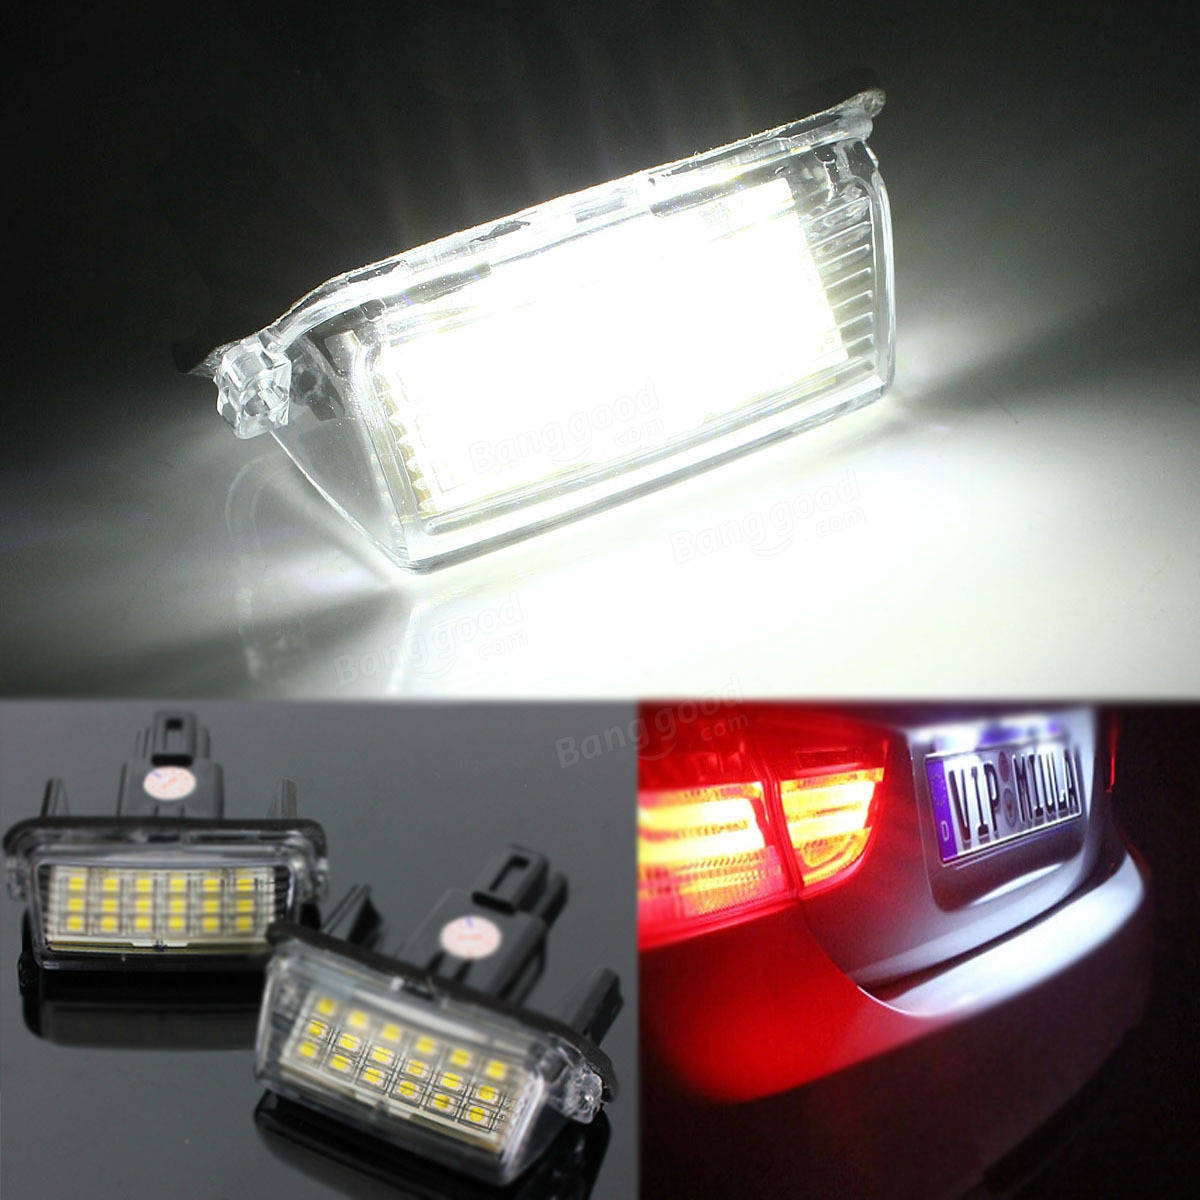 18 LED's Licentienummer Plate Car Lights Lamp voor Toyota Camry Yaris